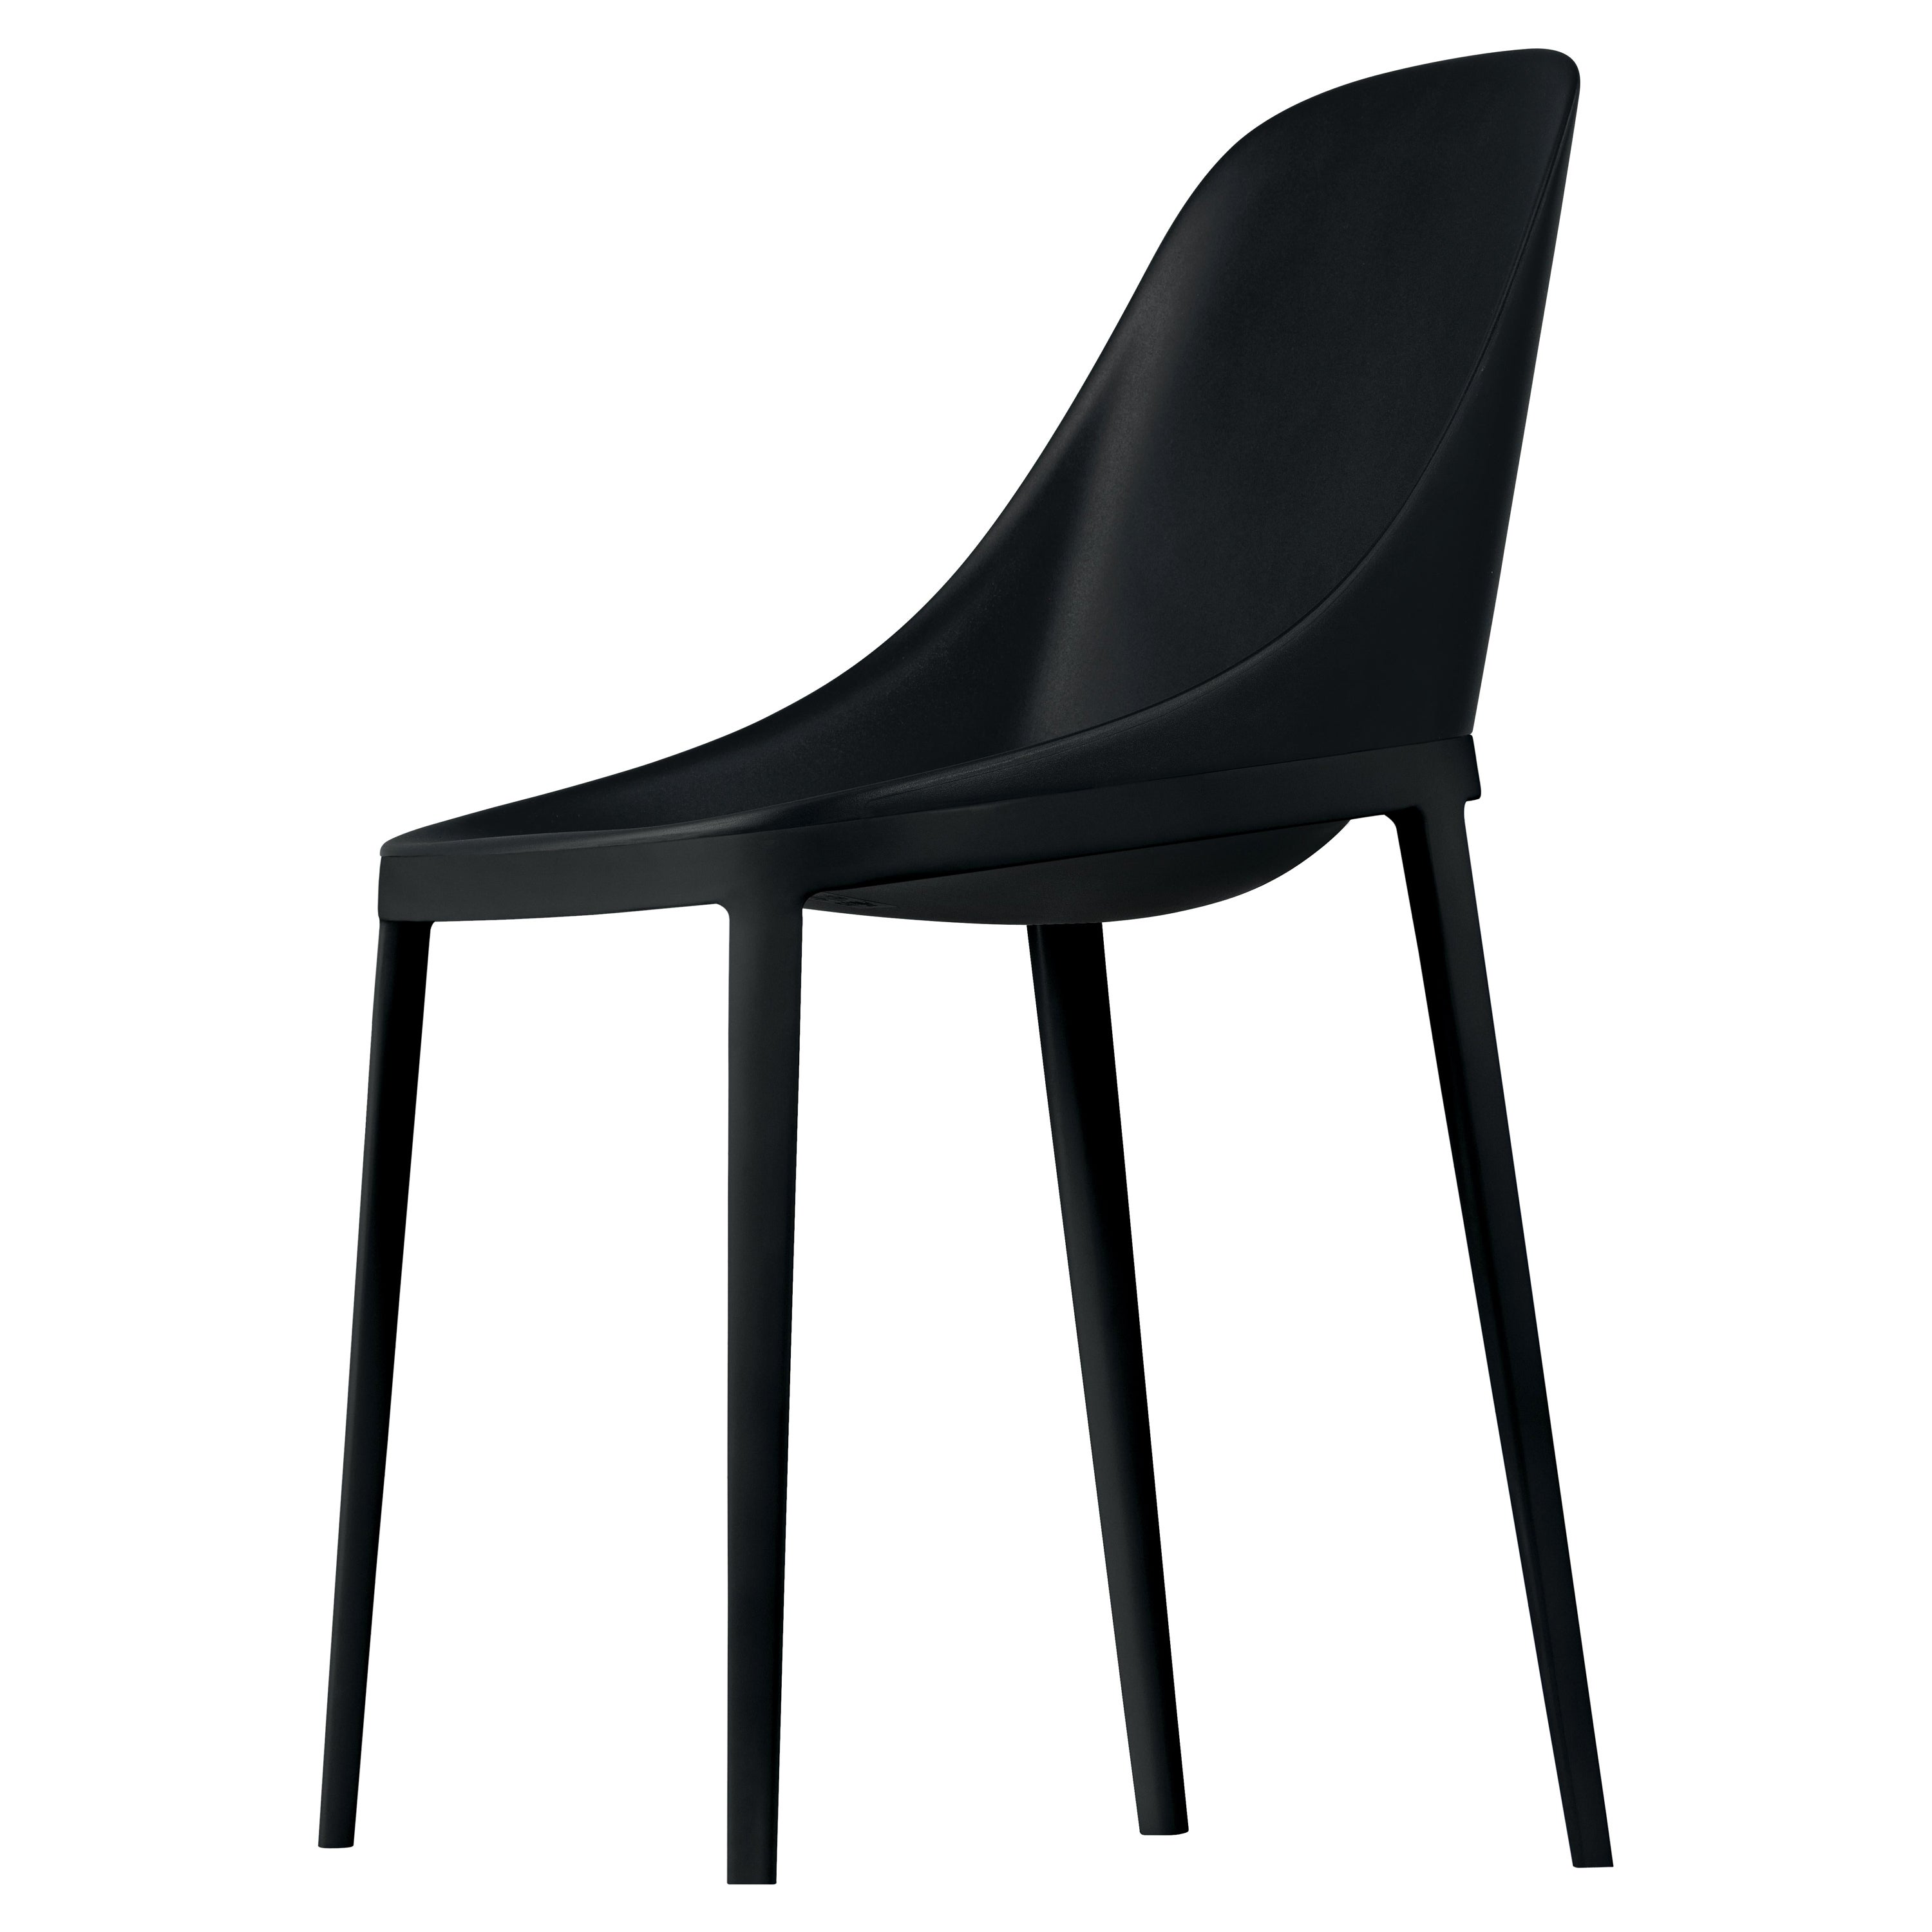 Alias 070 Elle Chair in Black with Lacquered Aluminum Frame by Eugeni Quitllet For Sale